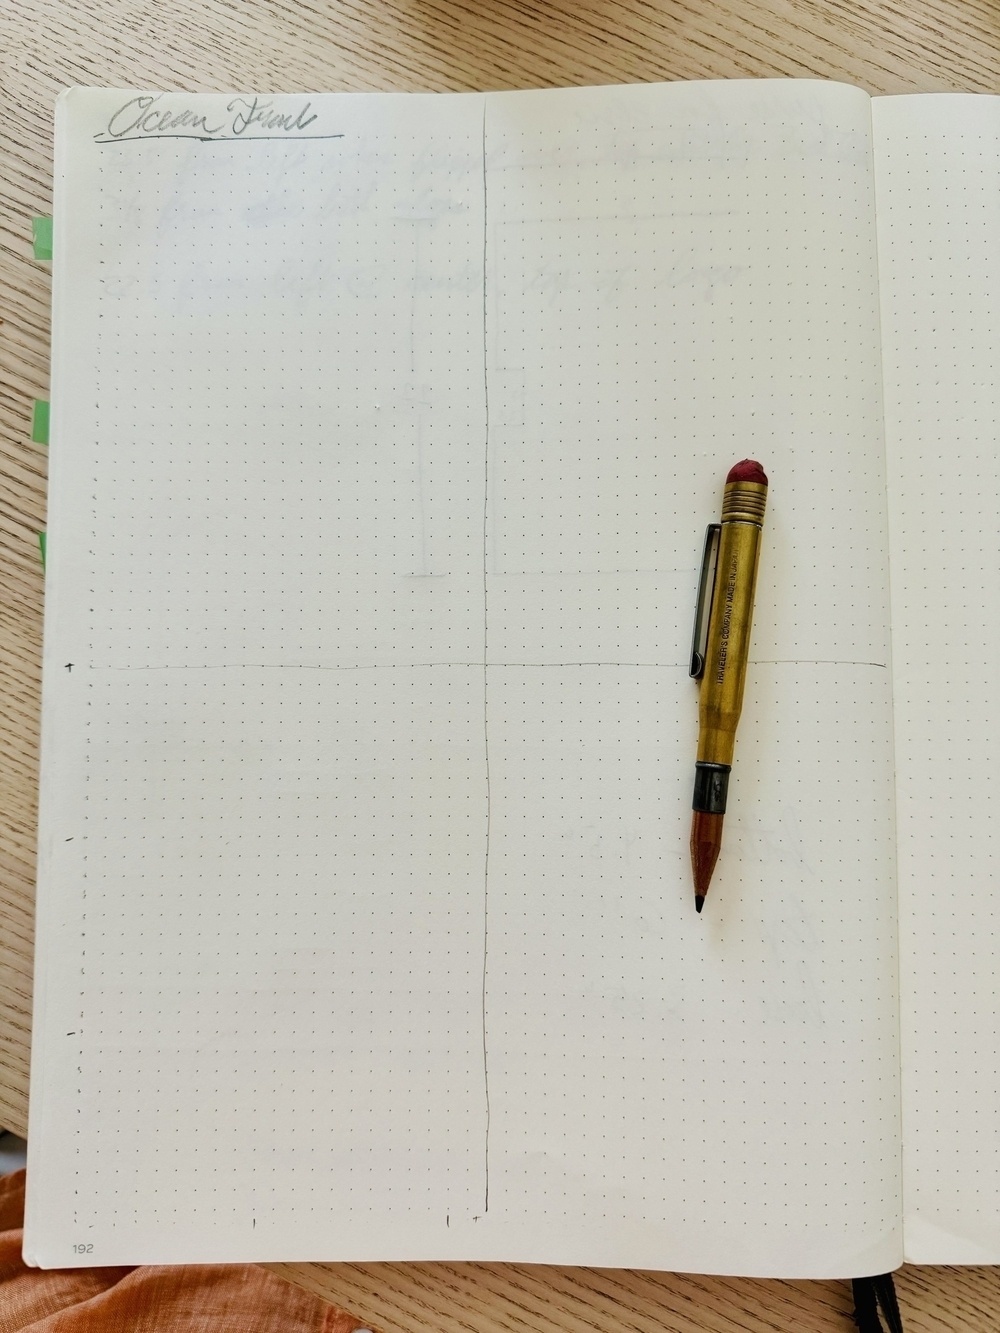 A dotted notebook lies open with a mechanical pencil placed on the right page and the left page labeled with the heading "Ocean Front".